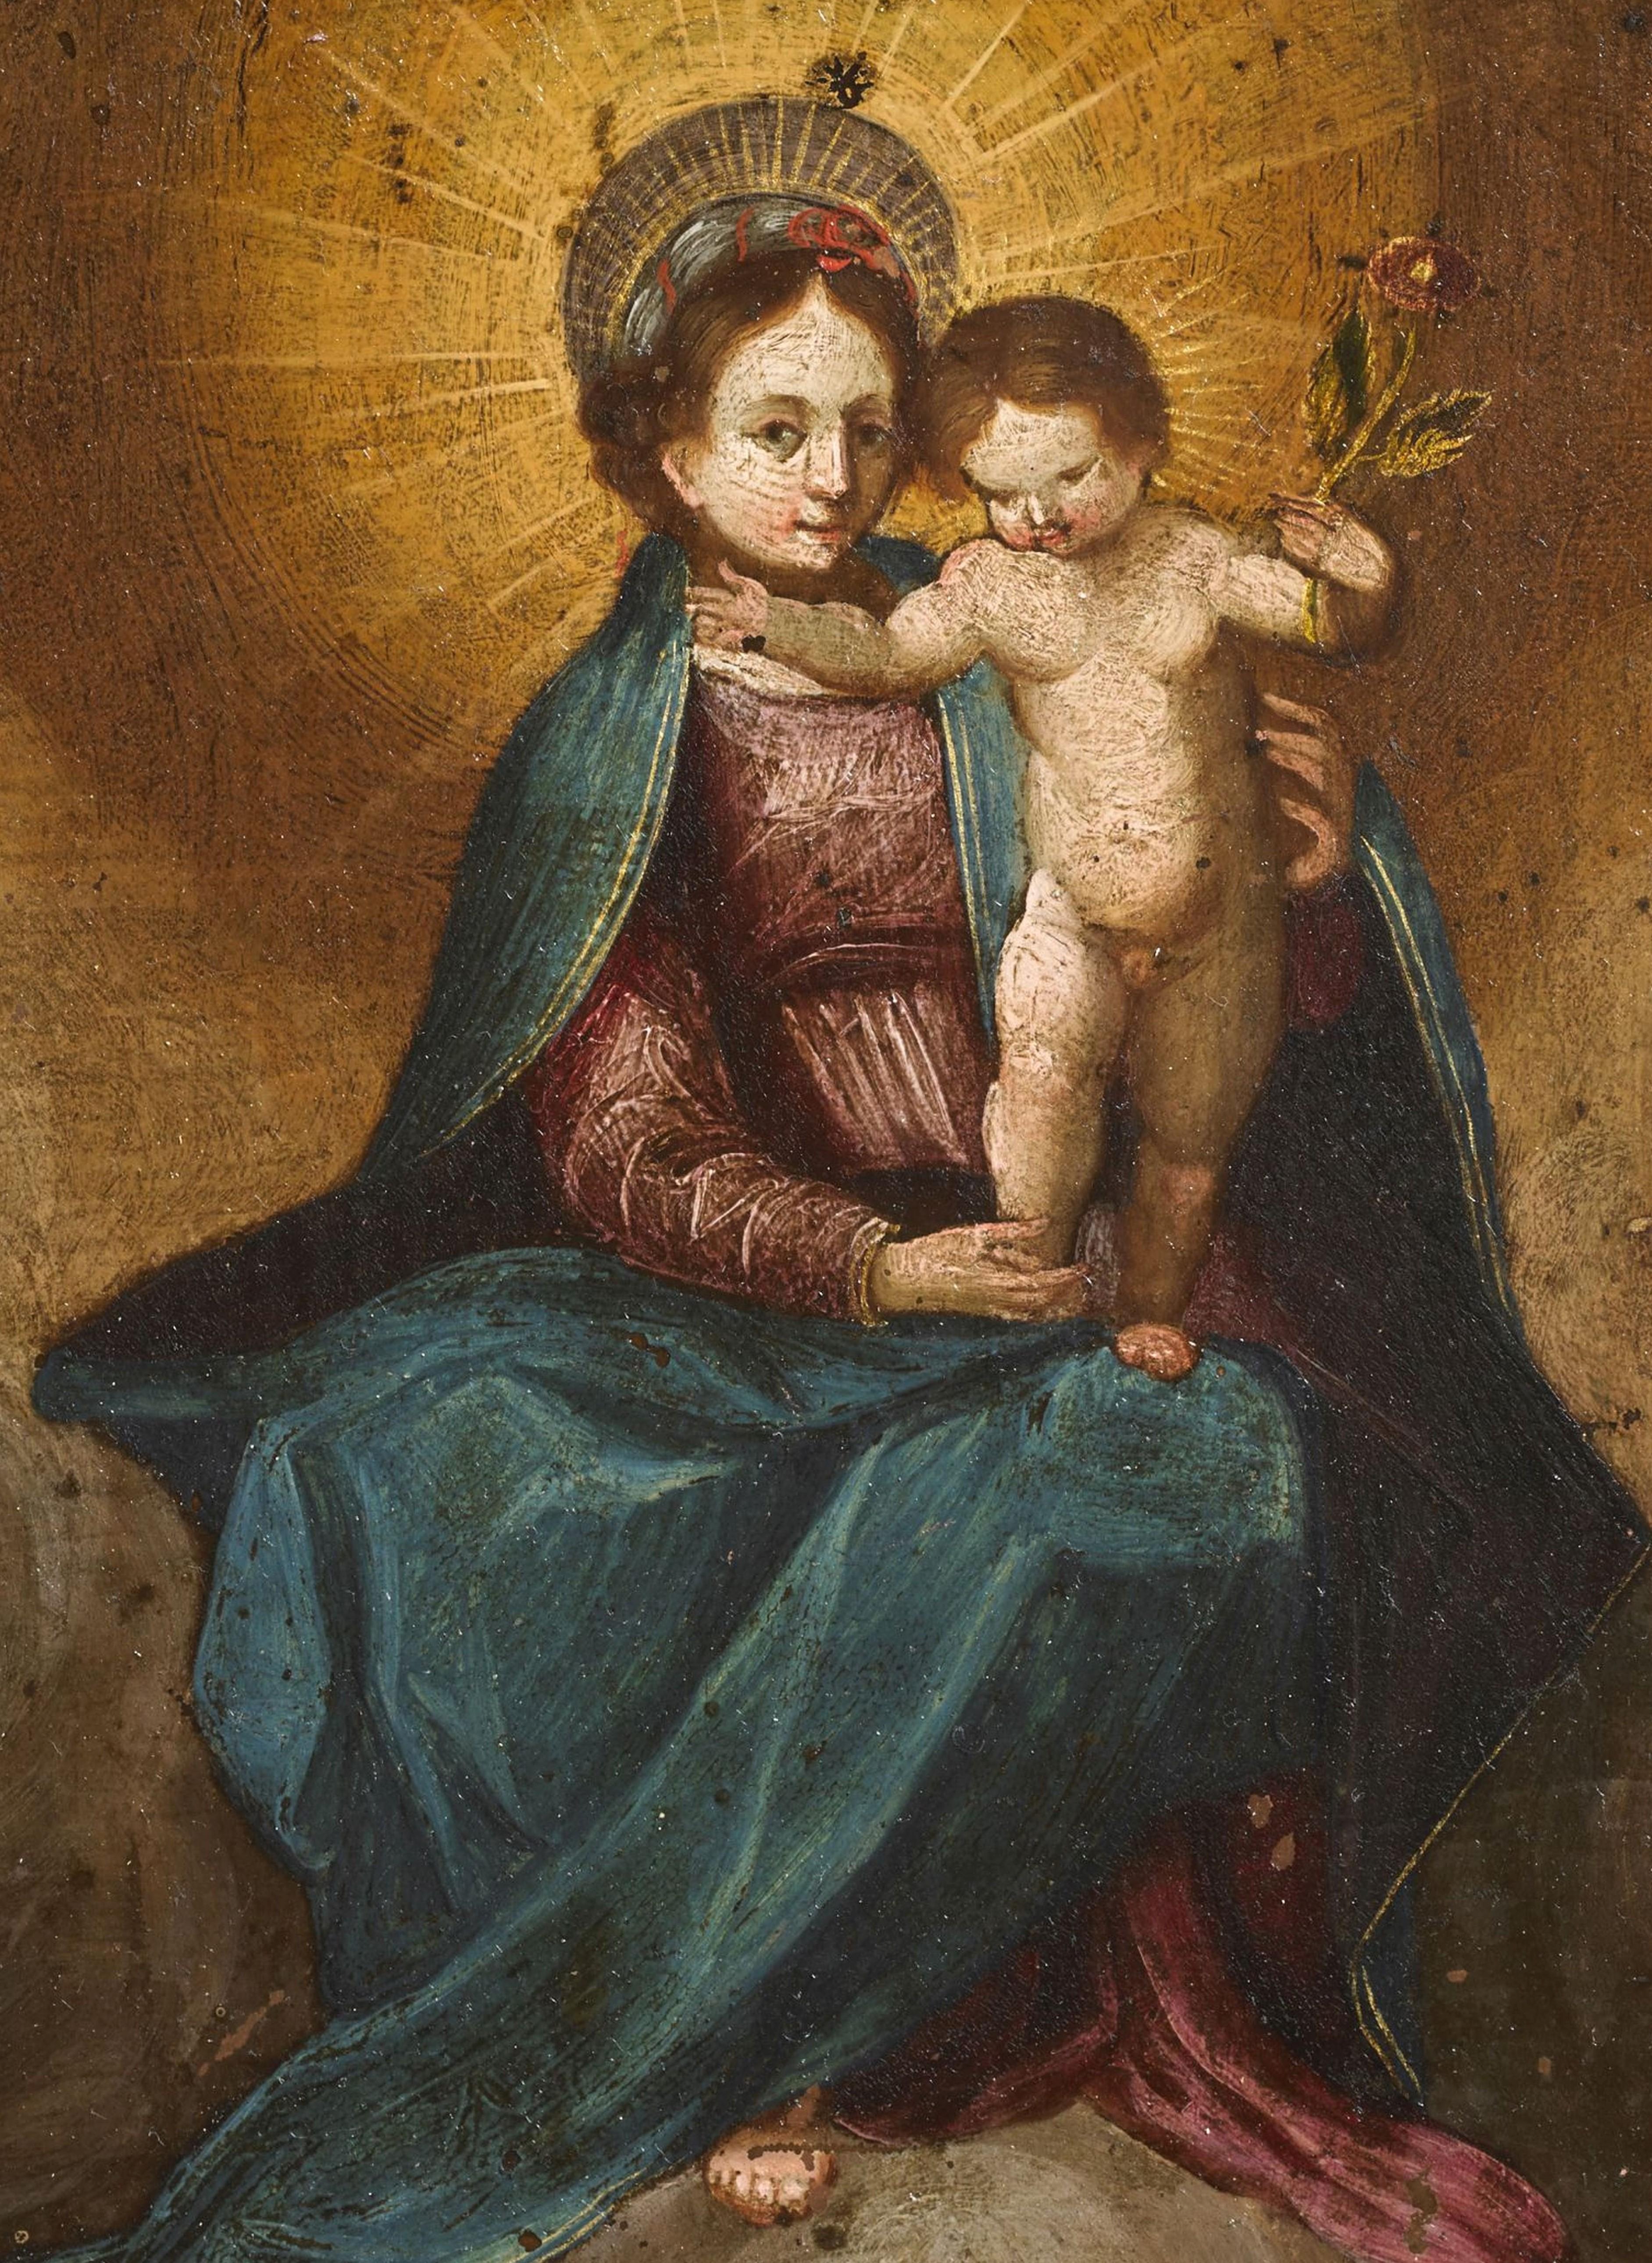 Delicate and caring Madonna with child, oil on copper, measuring 23 x 16 cm without frame and 32 x 25 cm with frame.

Sweet colors and intimate attitudes for this painting that possesses the best qualities of central Italy painting.

The paintings